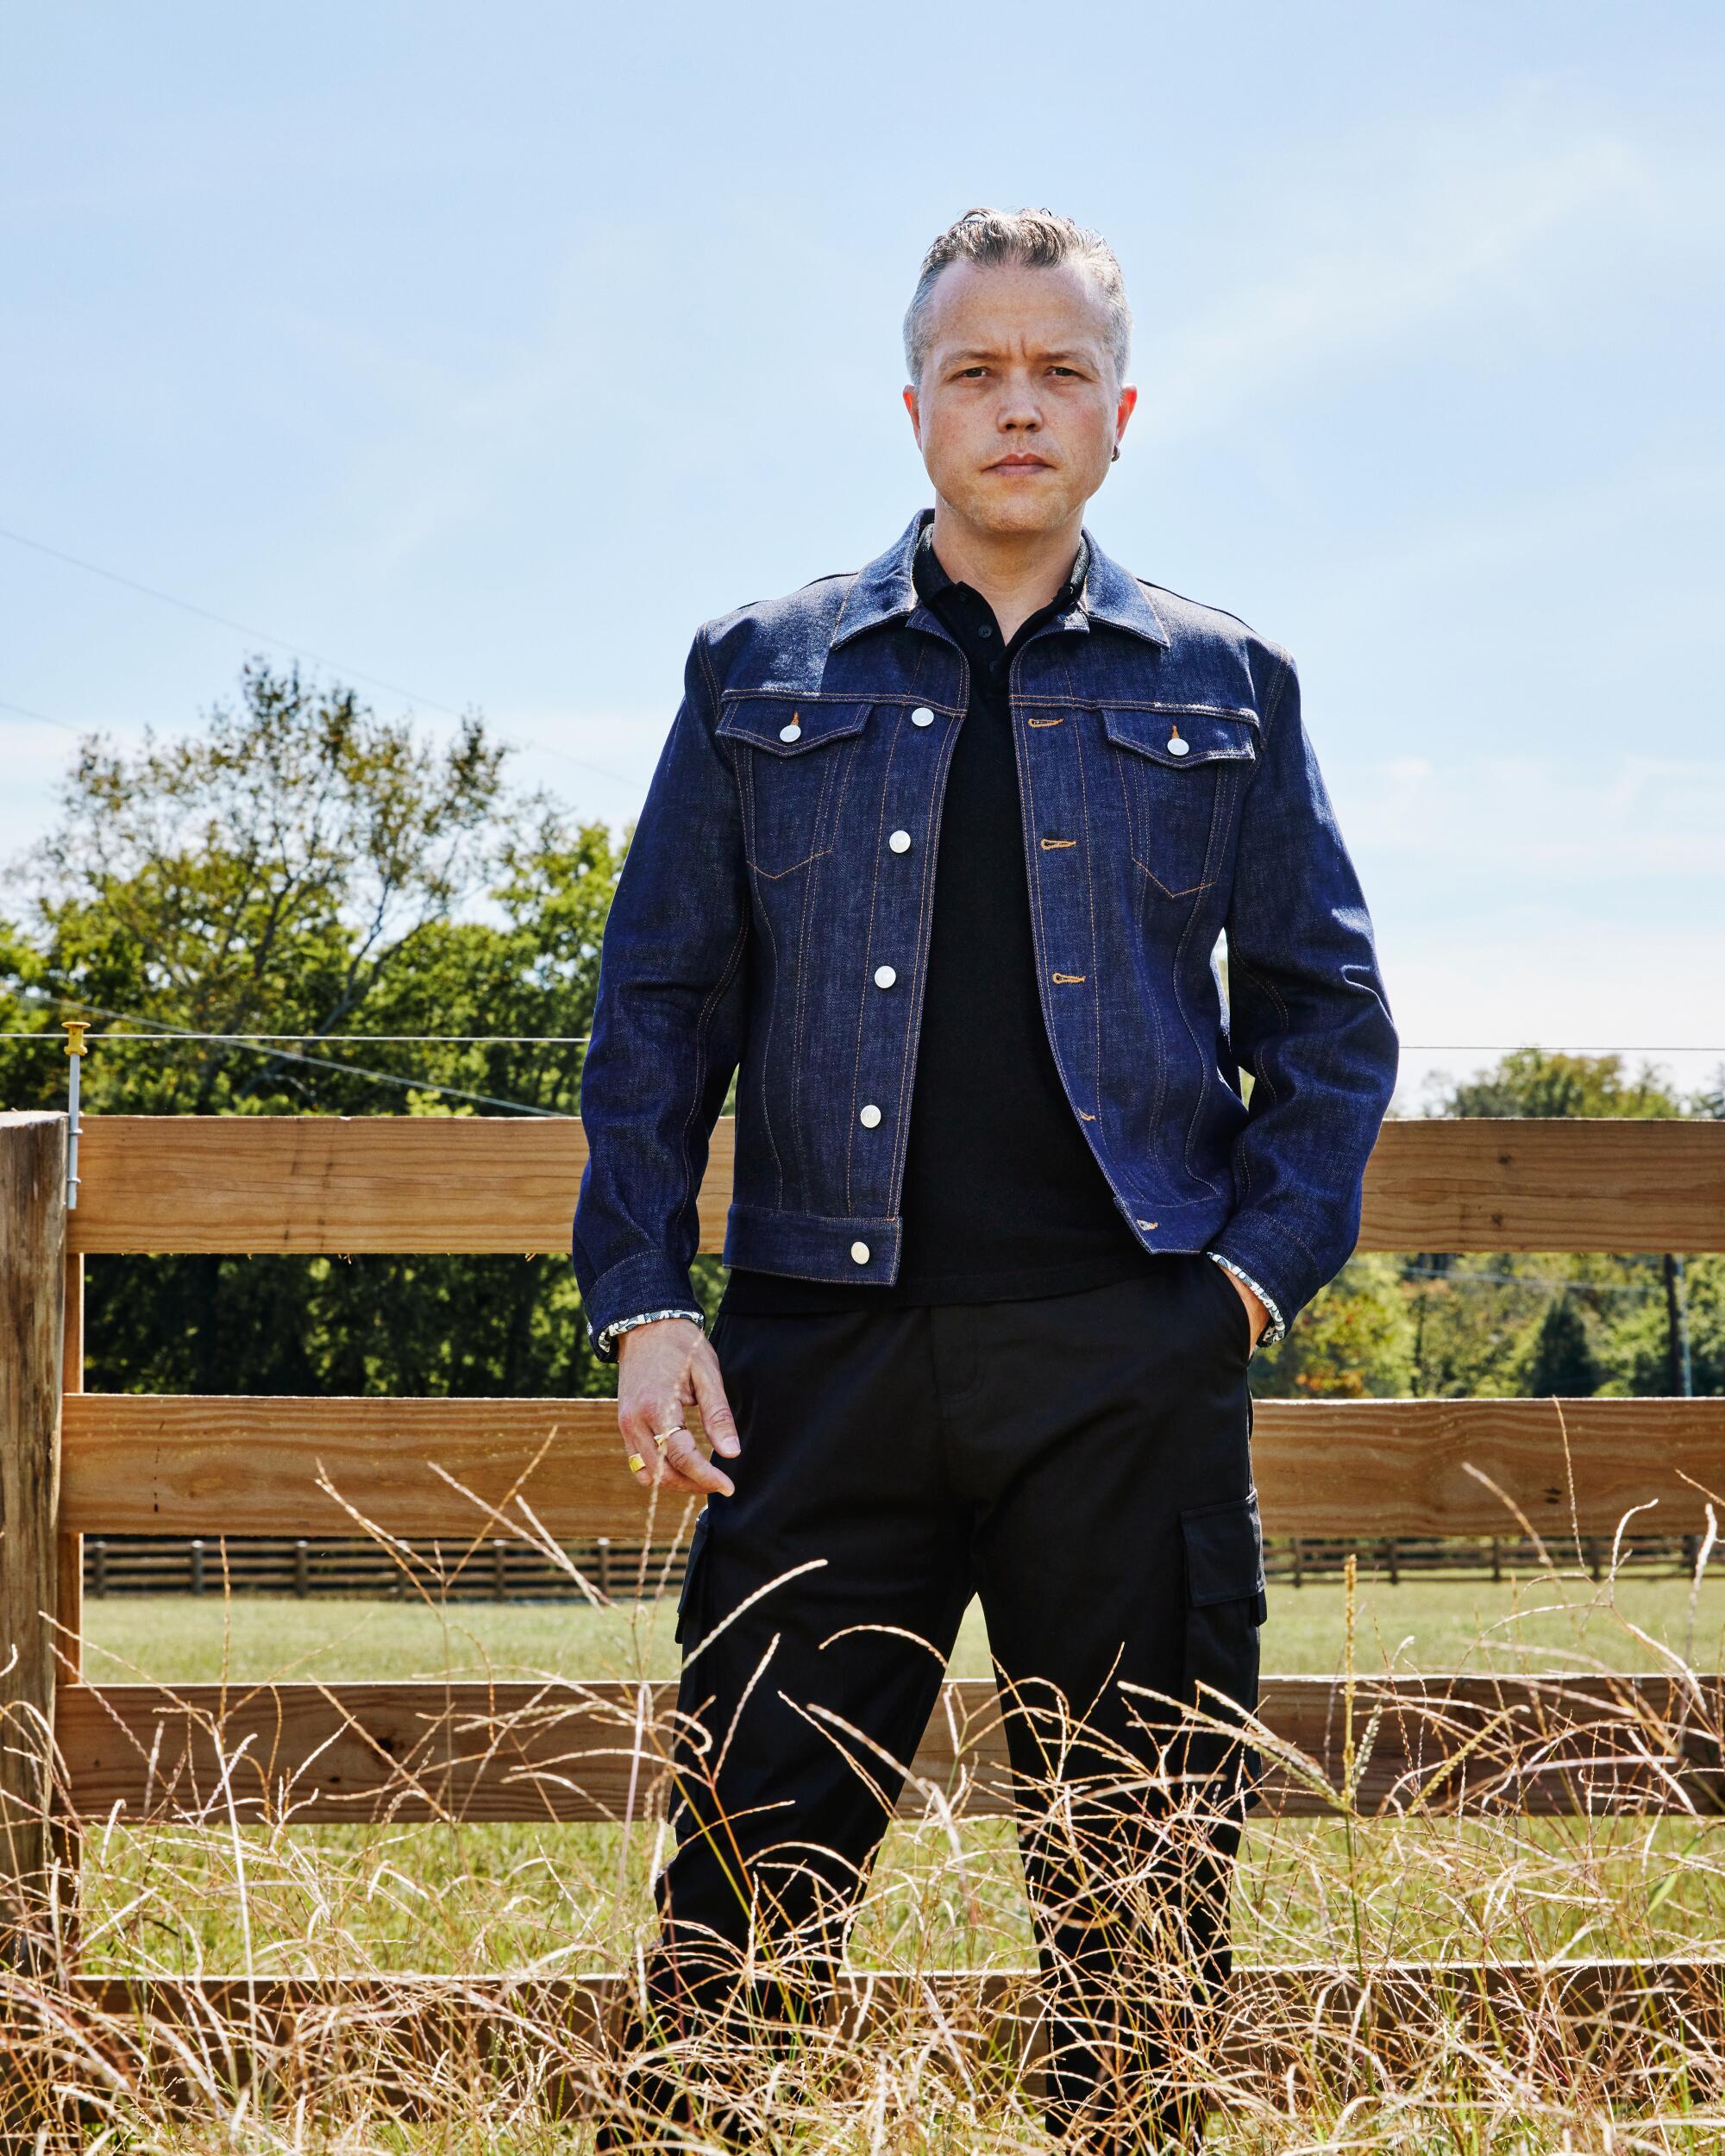 A country-rock singer-songwriter in a denim jacket stands outside in front of a wood fence